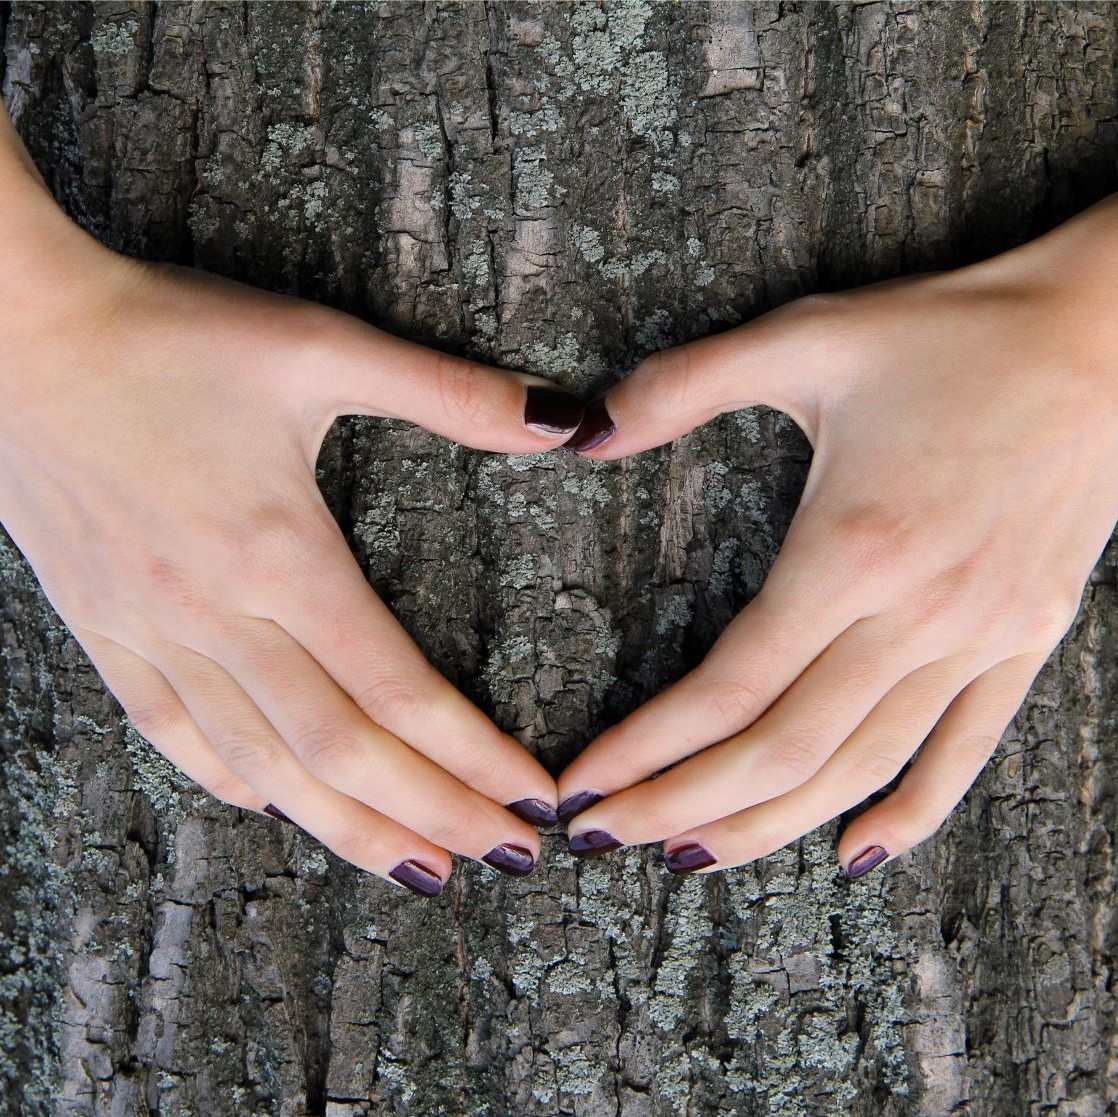 Hands making a heart shape in front of a tree trunk 